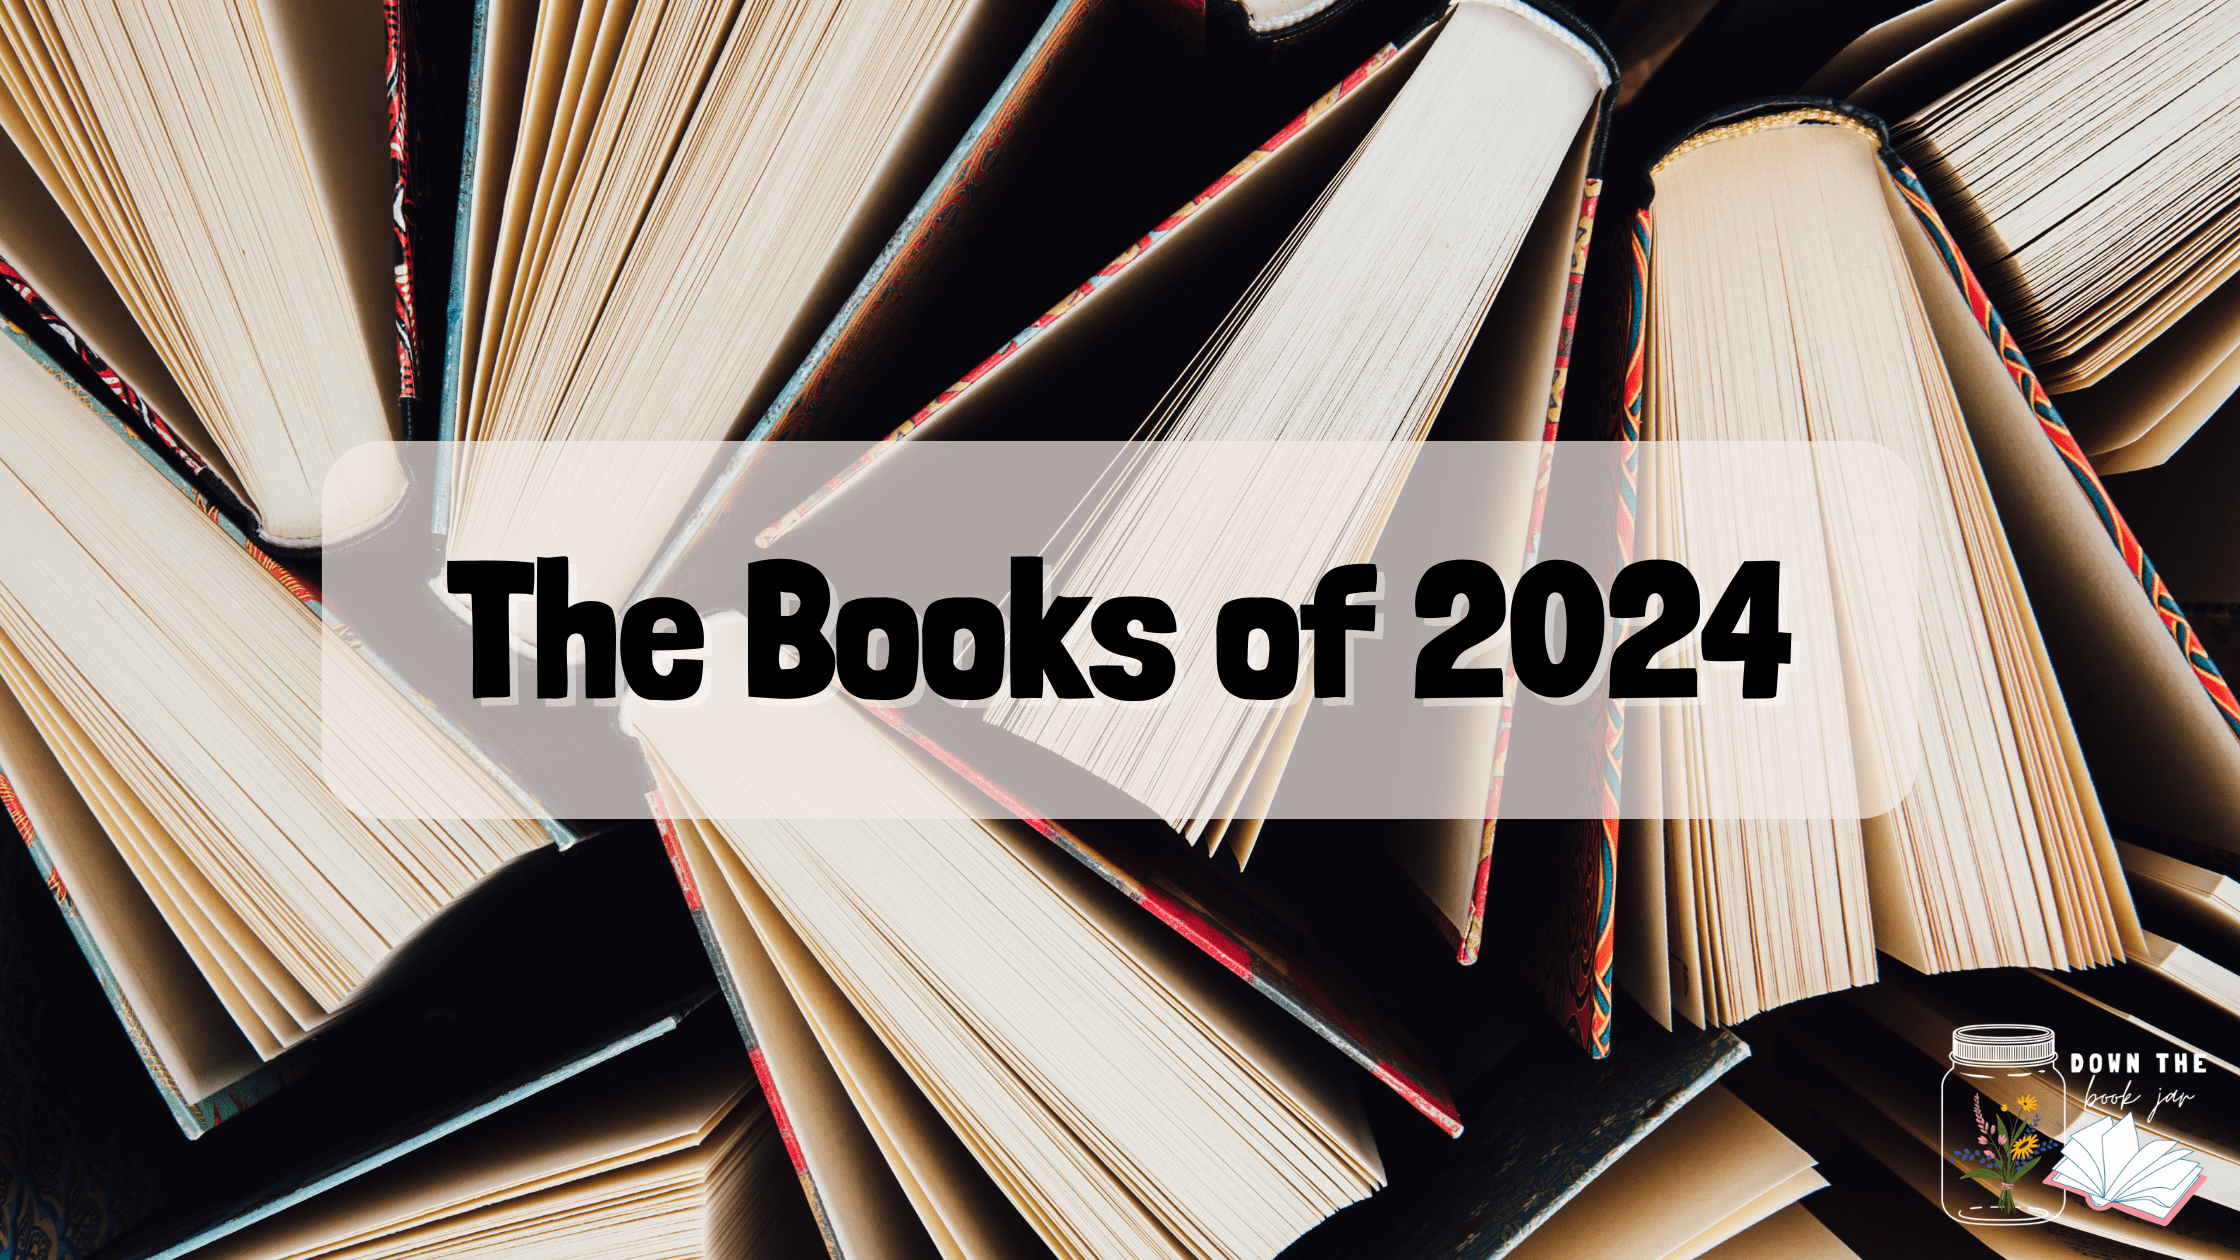 The Books of 2024